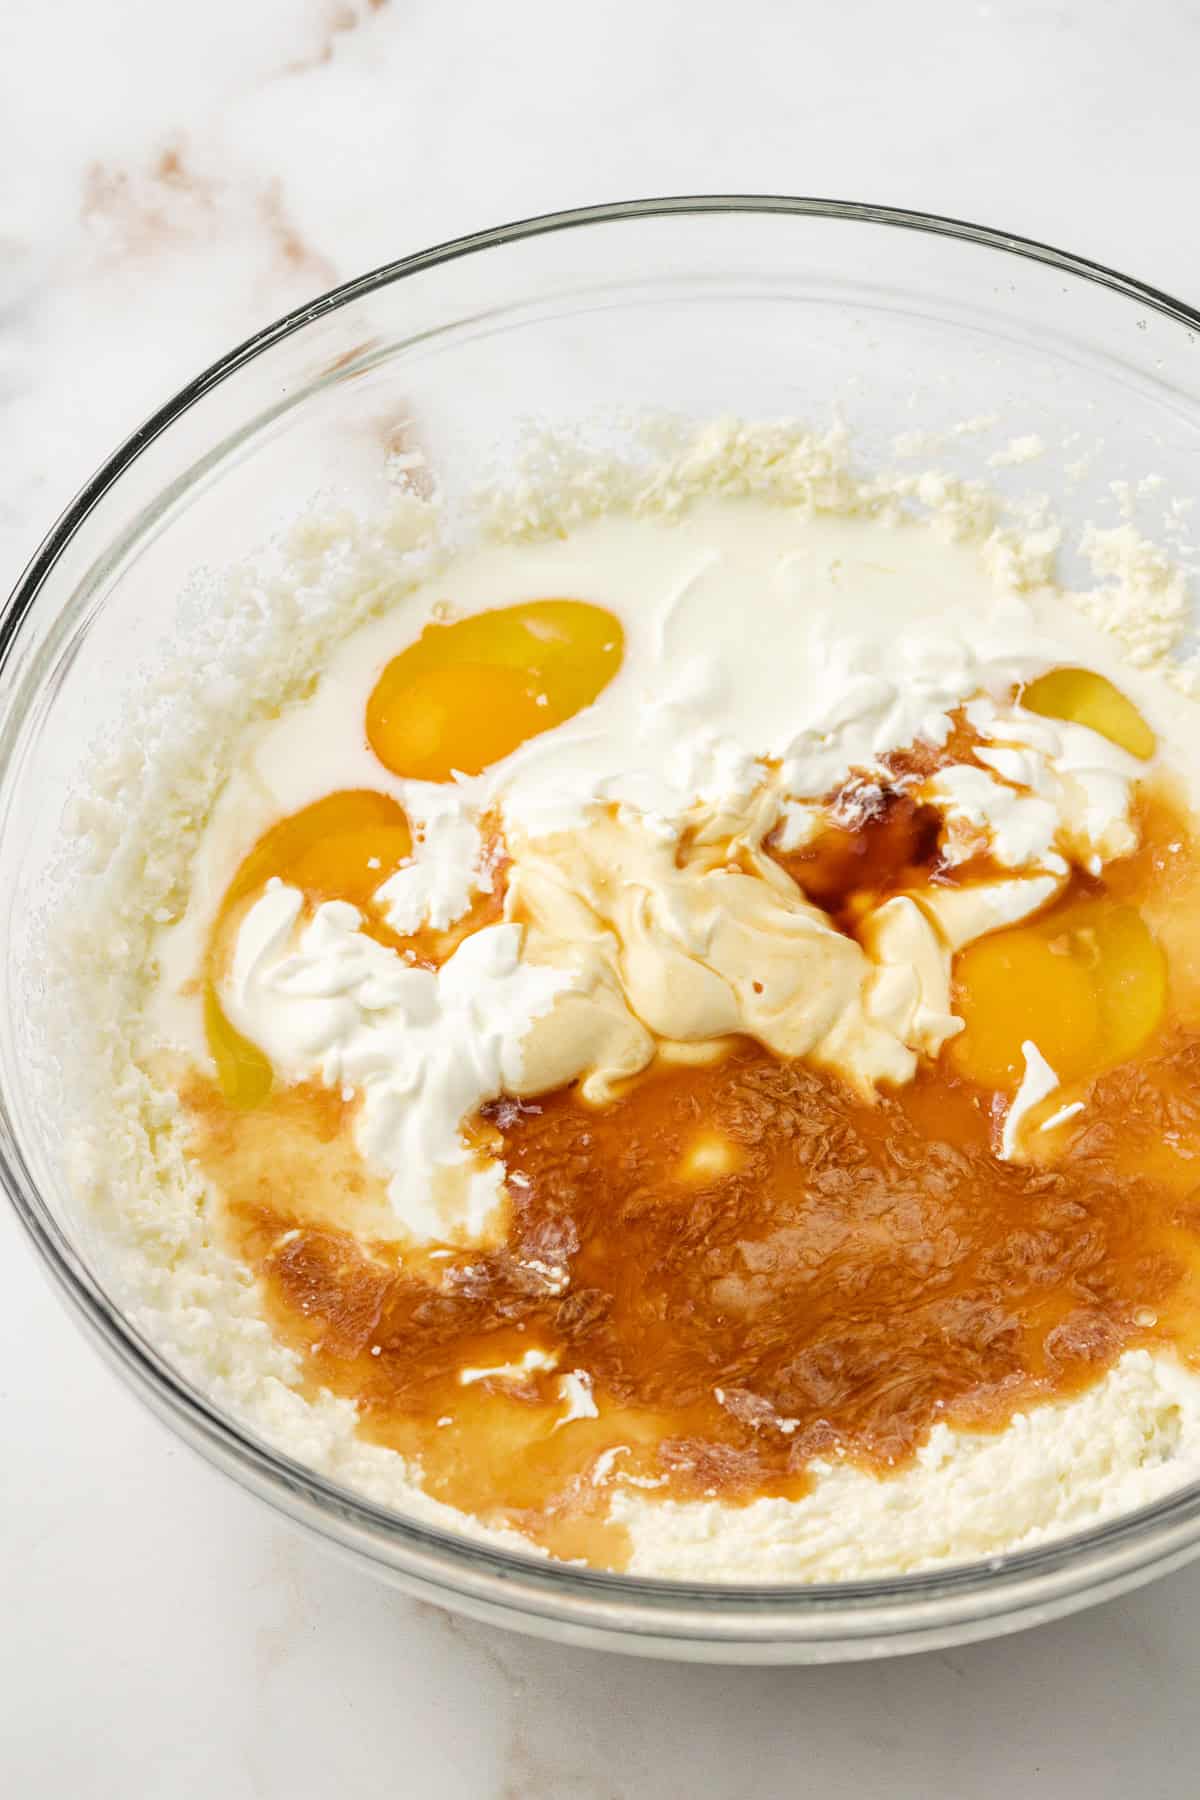 eggs, sour cream, milk, and vanilla extract on top of other vanilla cake ingredients in a clear glass bowl